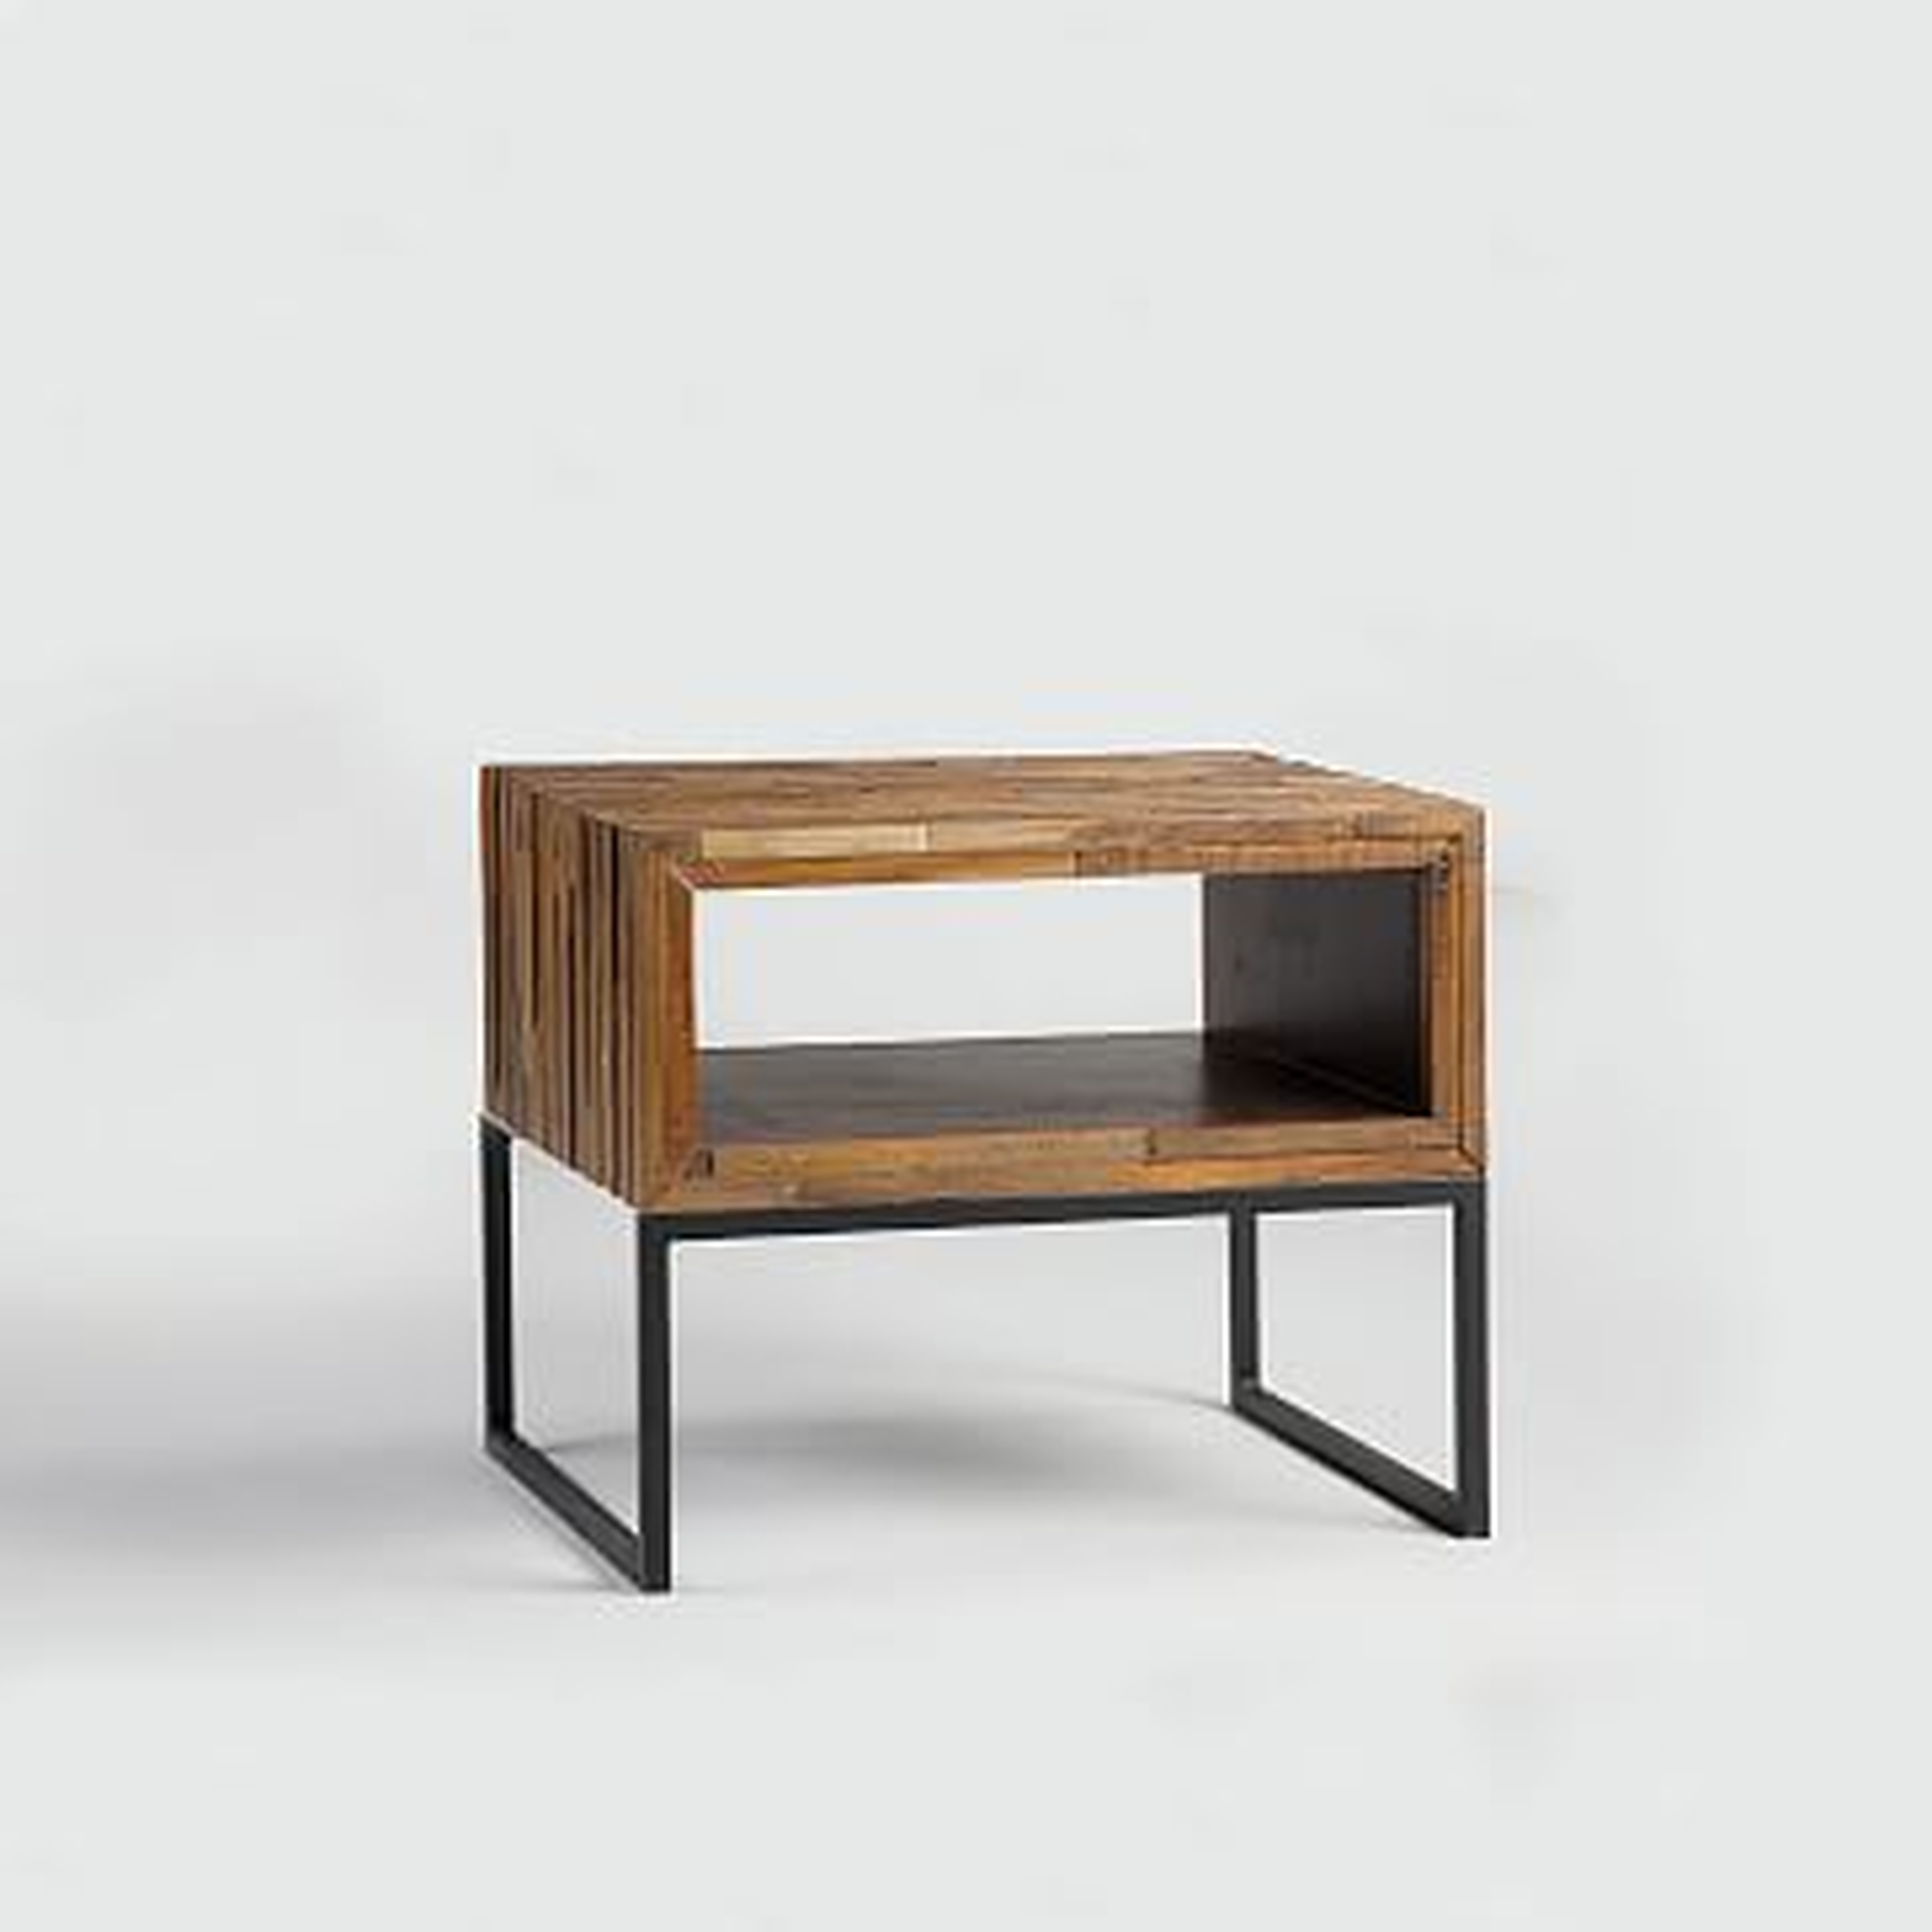 Mixed Wood Side Table - West Elm